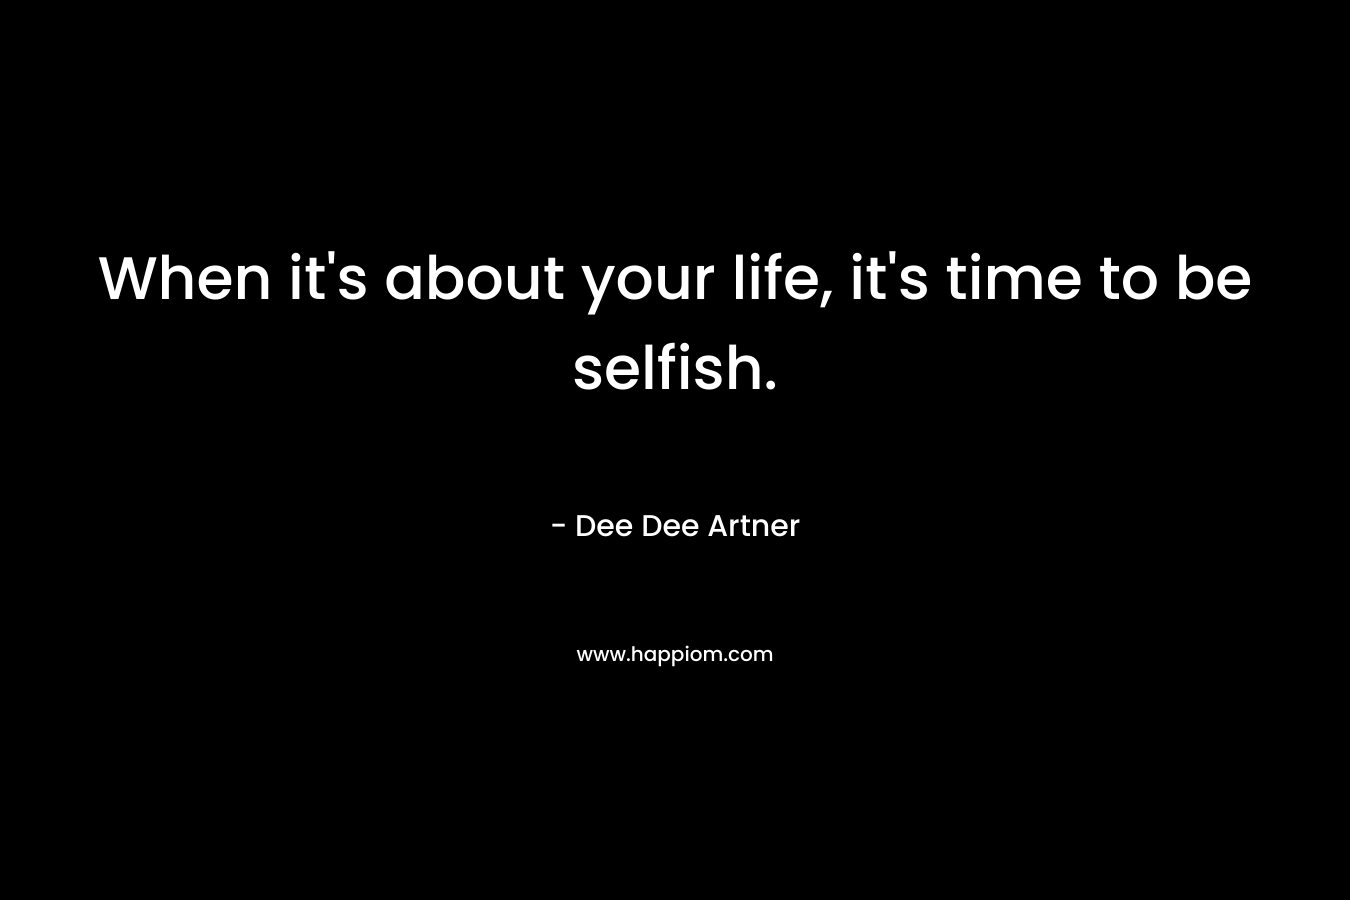 When it’s about your life, it’s time to be selfish. – Dee Dee Artner